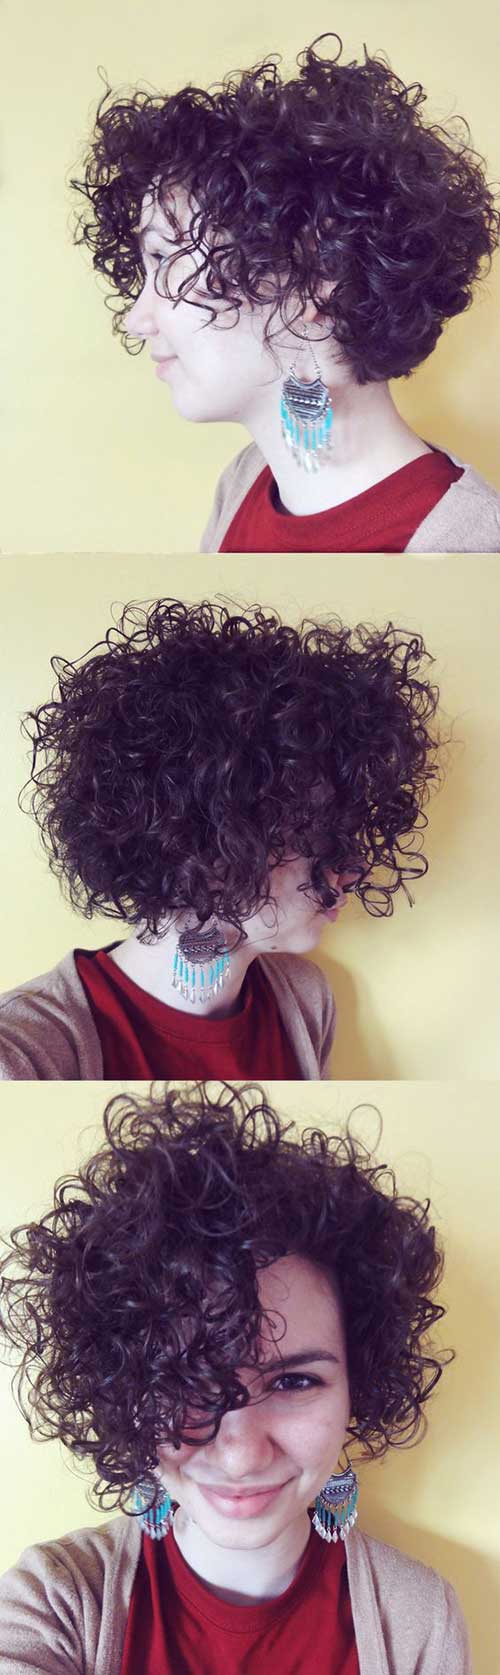 Short Curly Hairstyles-7